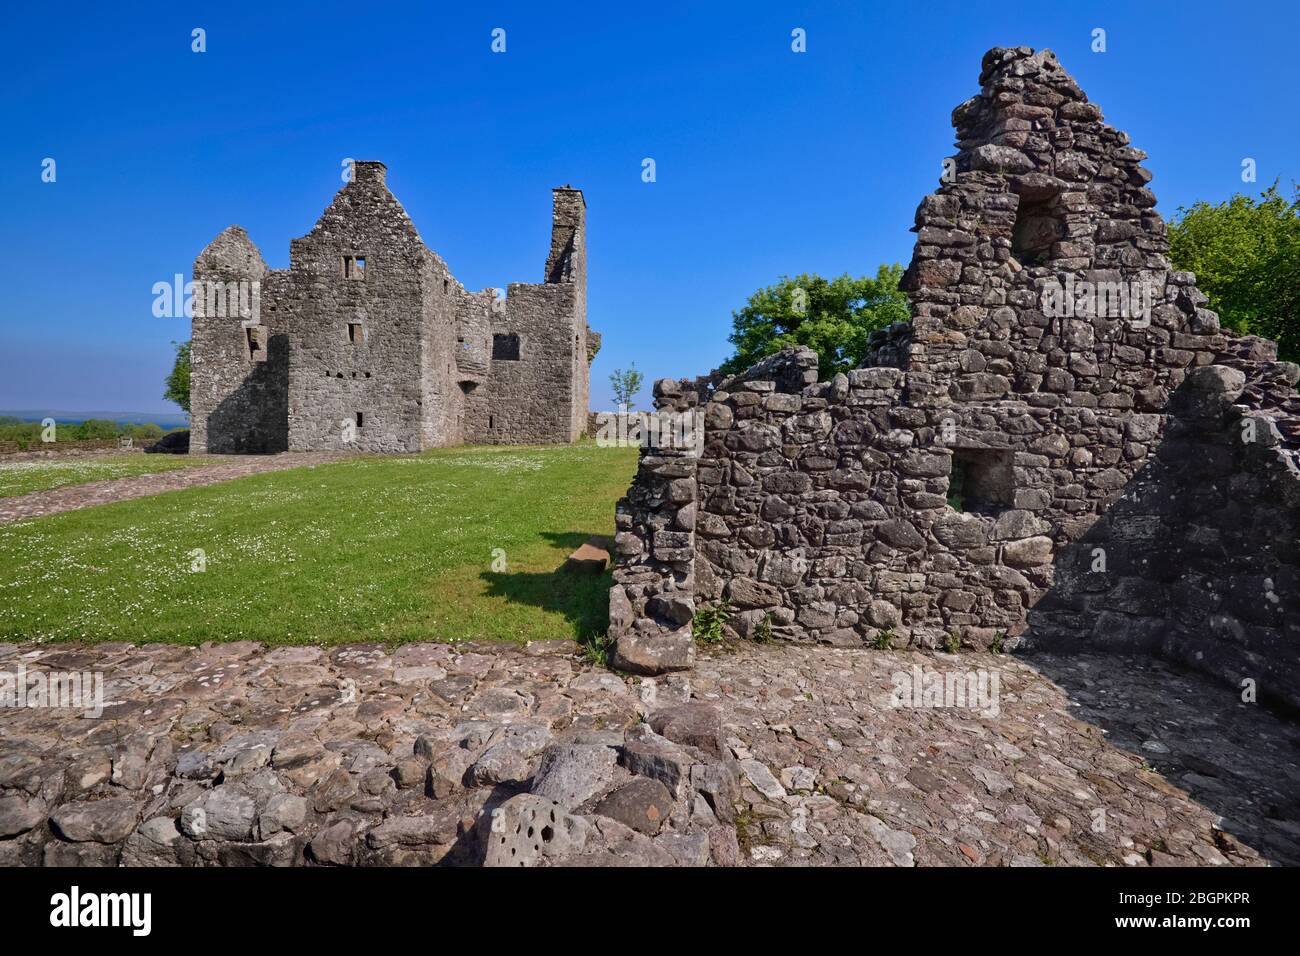 Ireland, County Fermanagh,  Ruin of Tully Castle on the shores of Lough Erne which was a fortified house with a rectangular bawn built for Sir John Hume, a Scottish planter, in 1619. Stock Photo